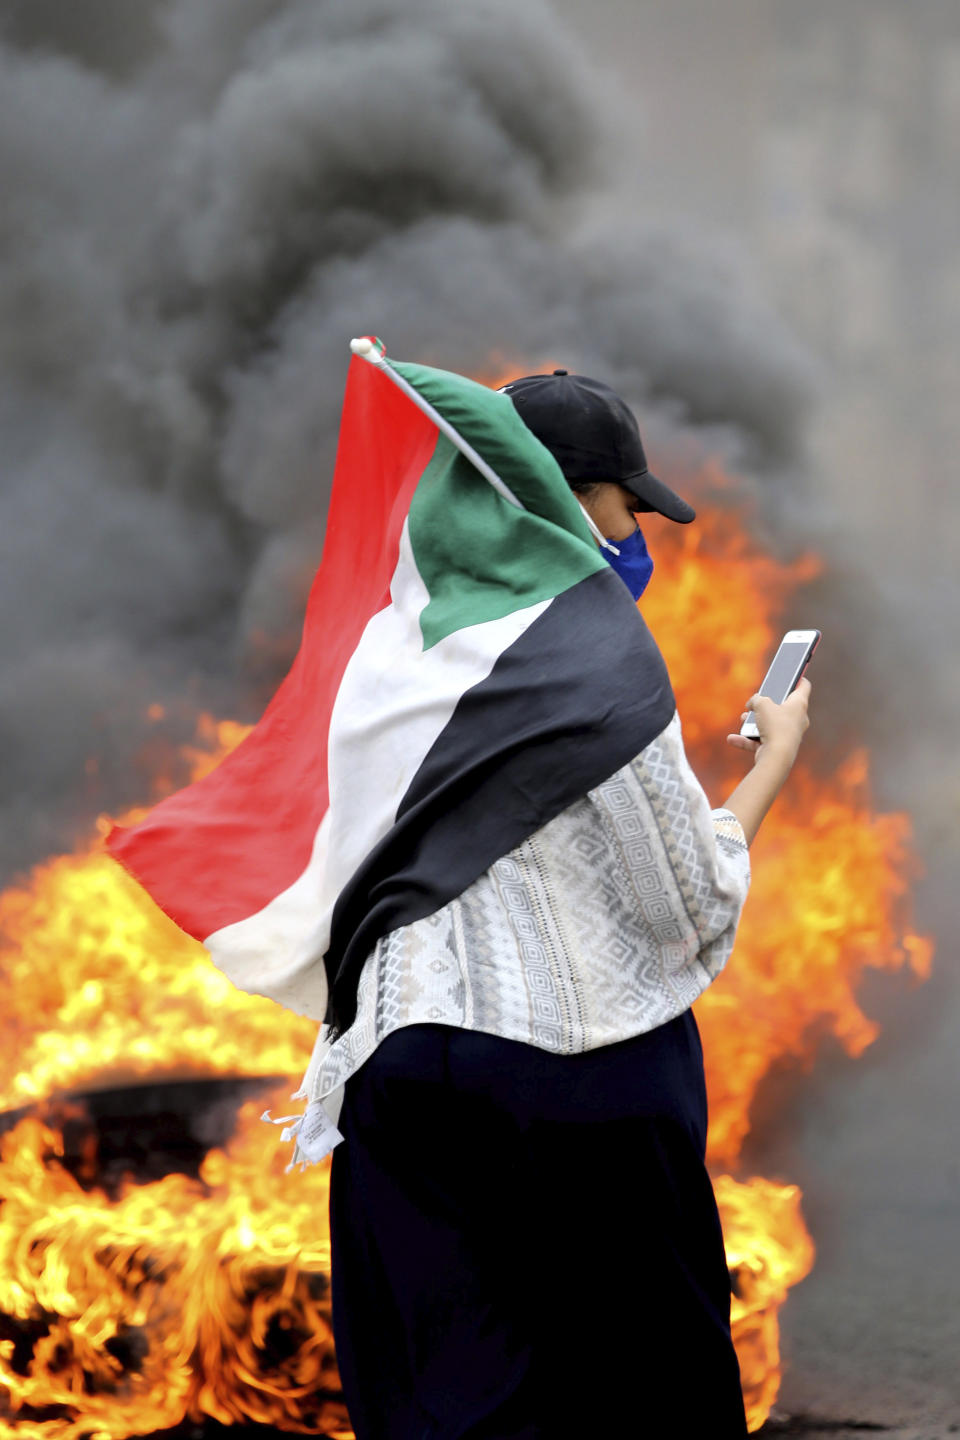 A Sudanese woman carries a national flag during a demonstration to commemorate the first anniversary of a deadly crackdown carried out by security forces on protesters during a sit-in outside the army headquarters, in Khartoum, Sudan, Saturday, May 23, 2020. (AP Photo/ Marwan Ali)